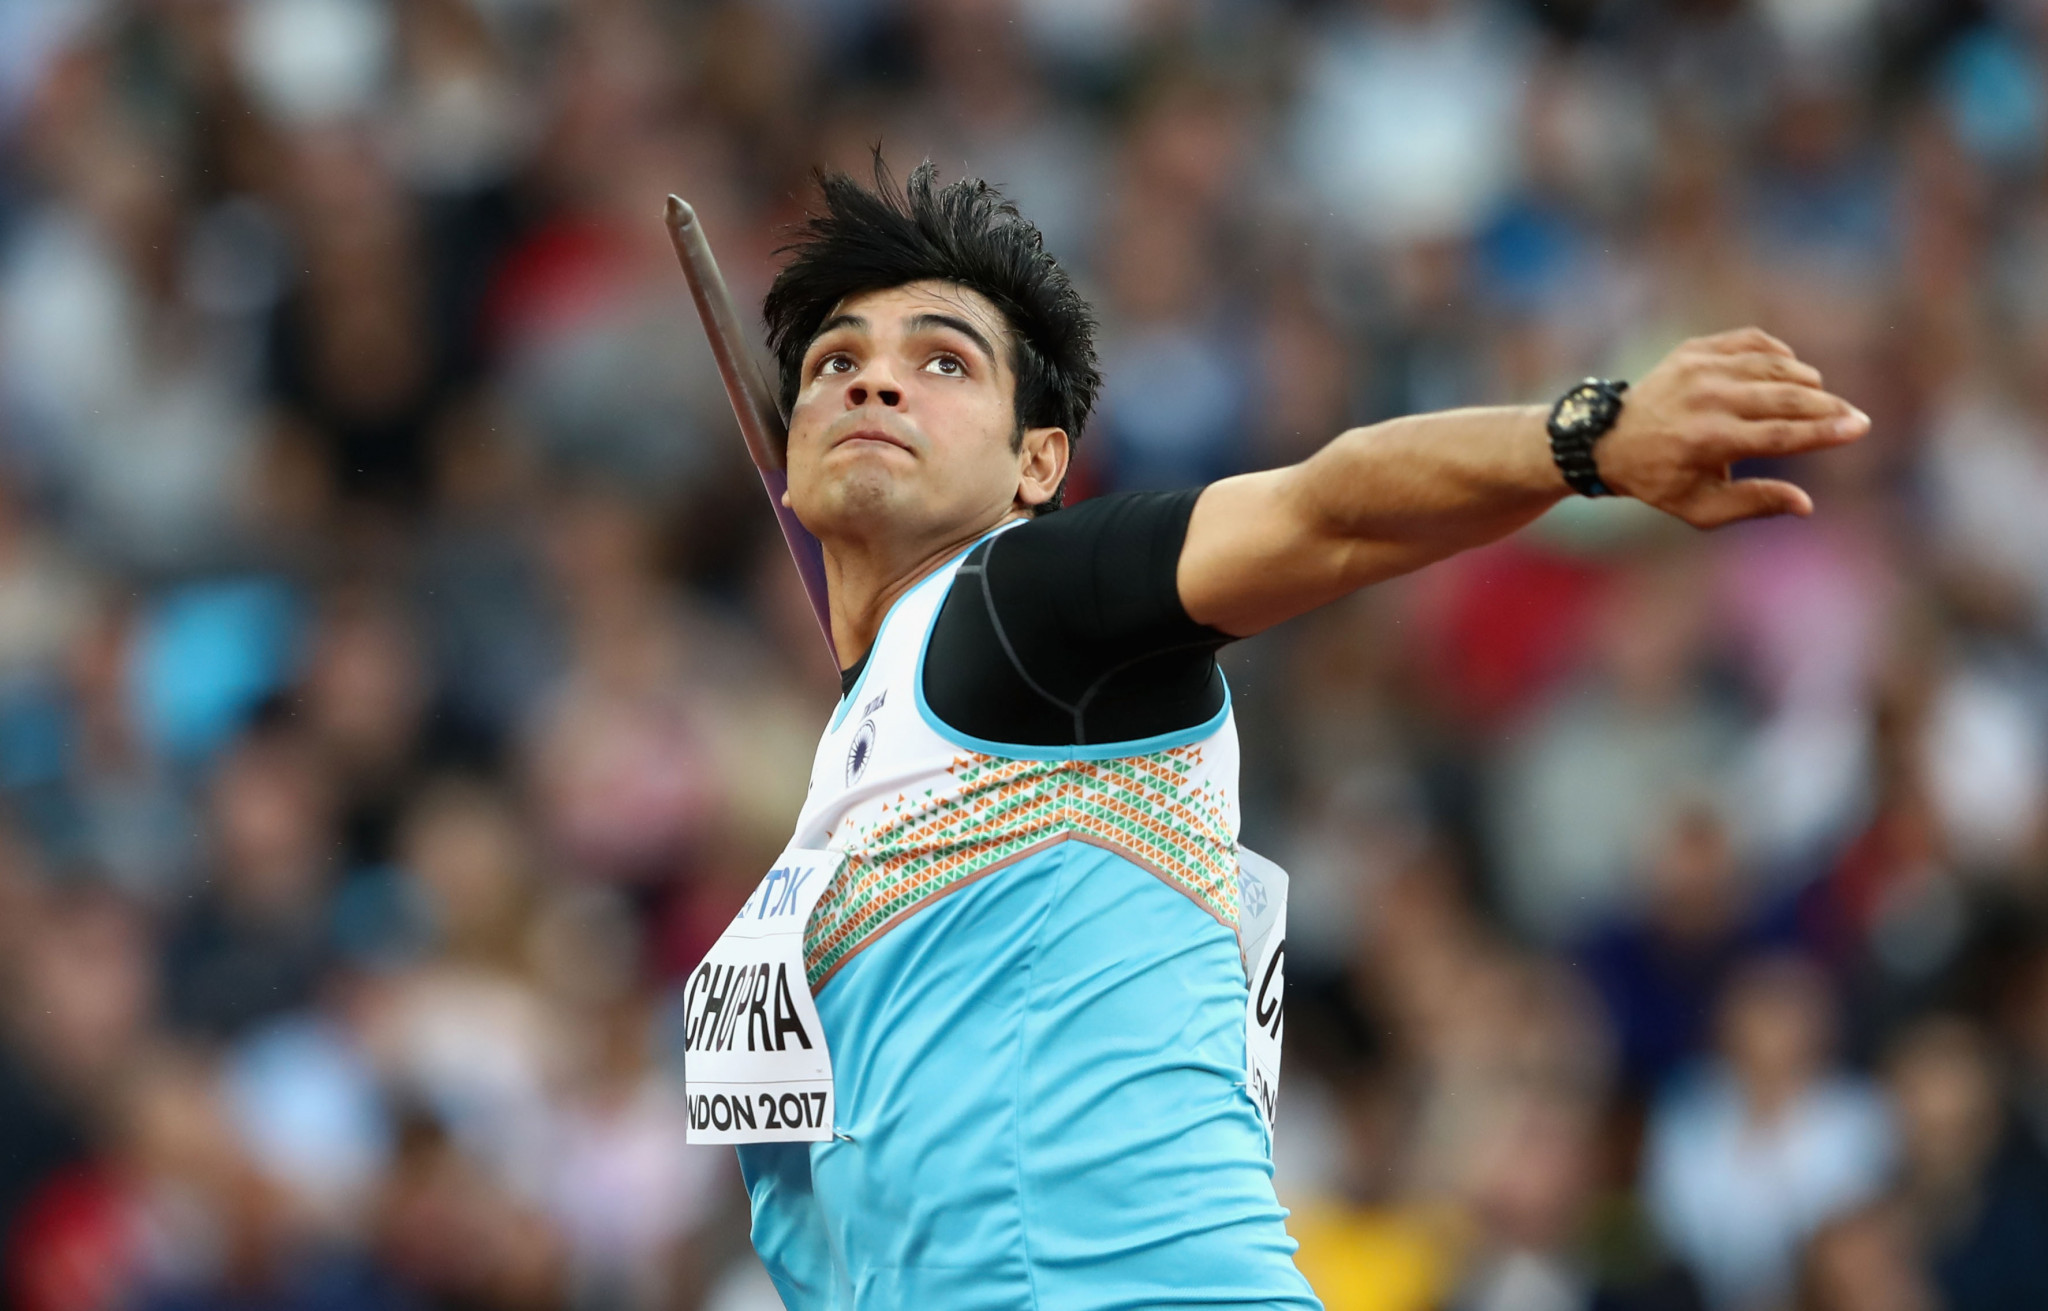 India chooses javelin thrower Chopra as flagbearer for 2018 Asian Games Opening Ceremony